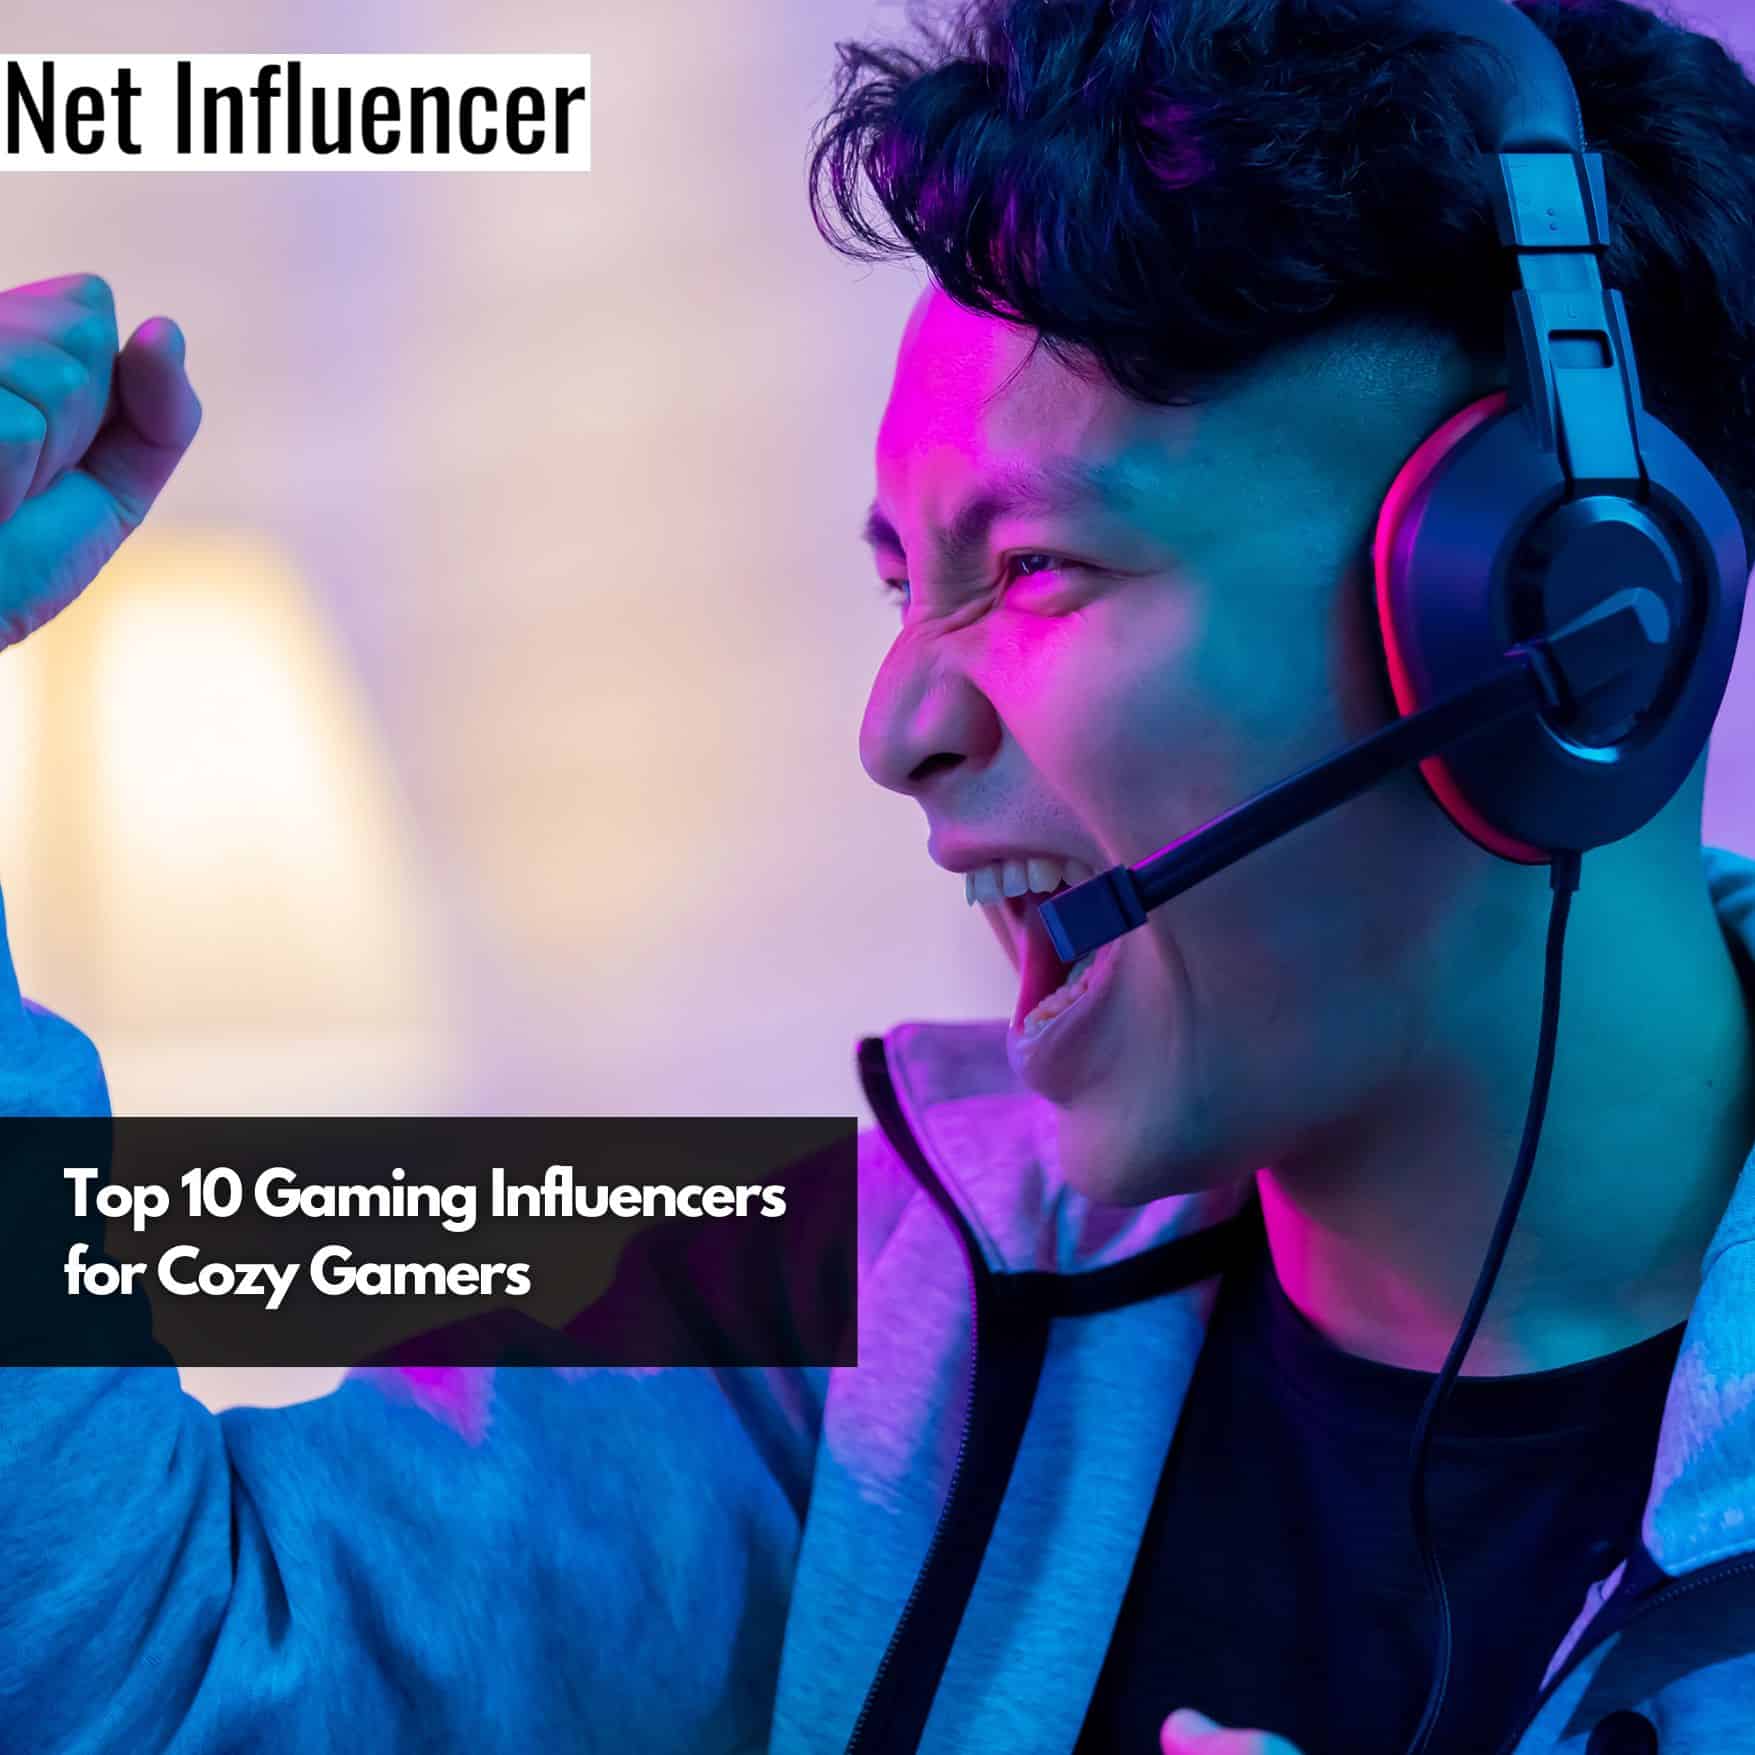 The 10 Cozy Gamers You Should Know (1)